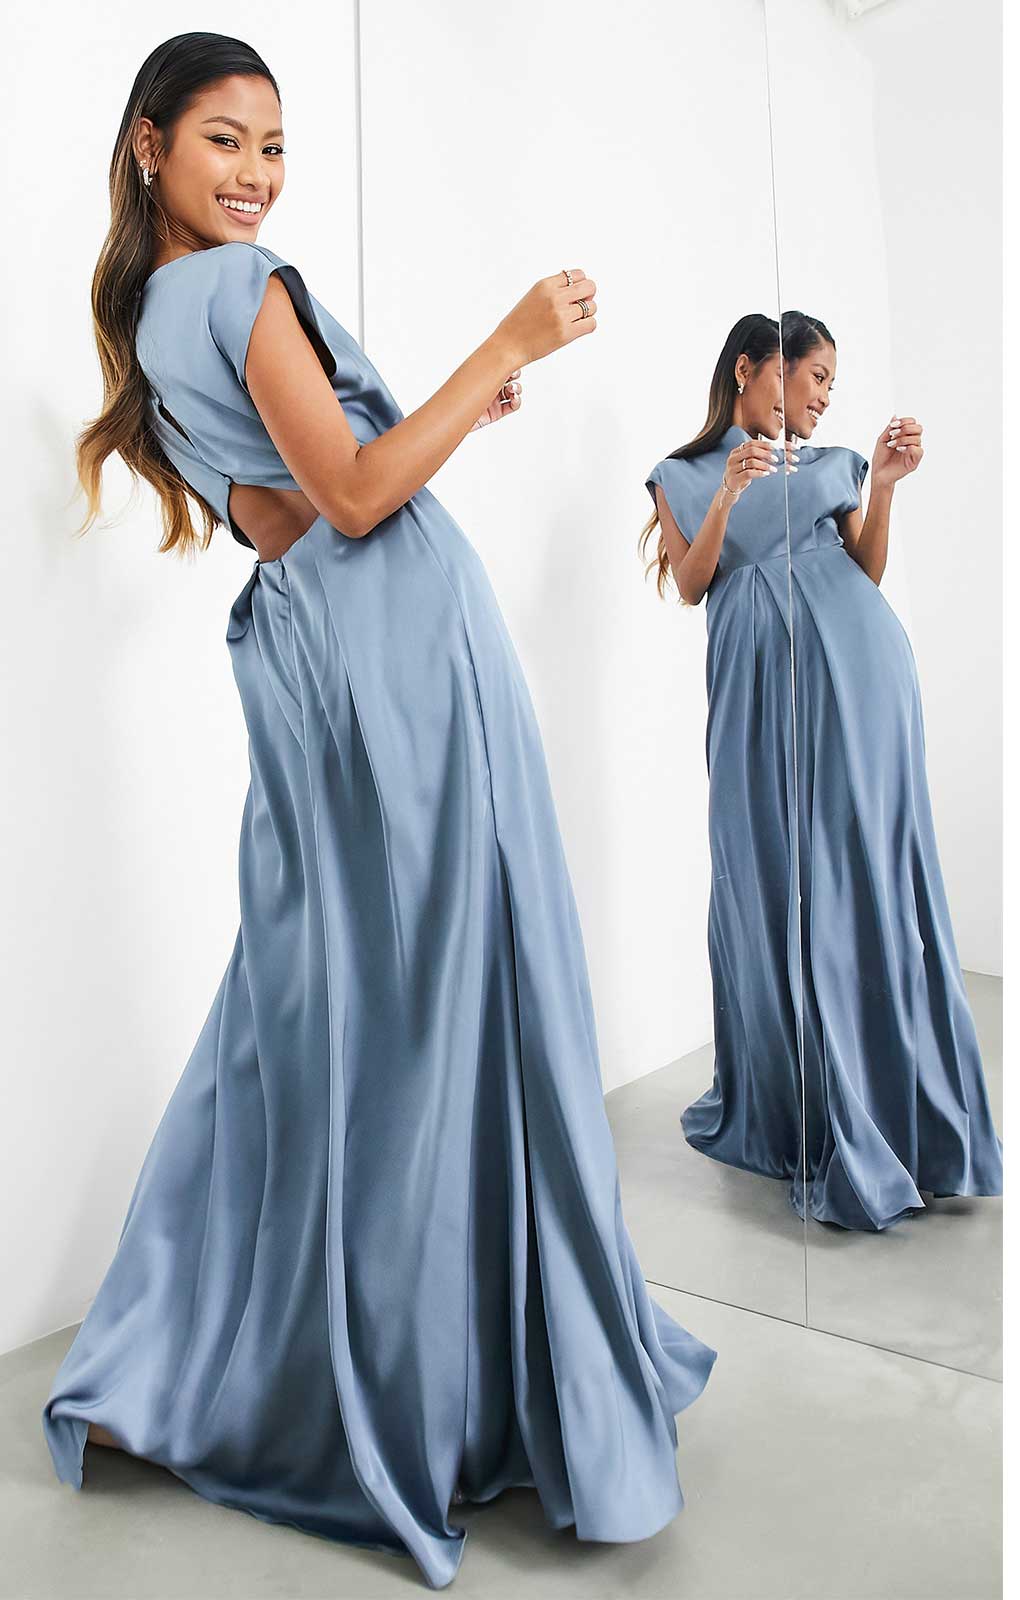 Asos Edition Satin Cowl Neck Maxi Dress With Cut Out Back In Dusky Blue product image